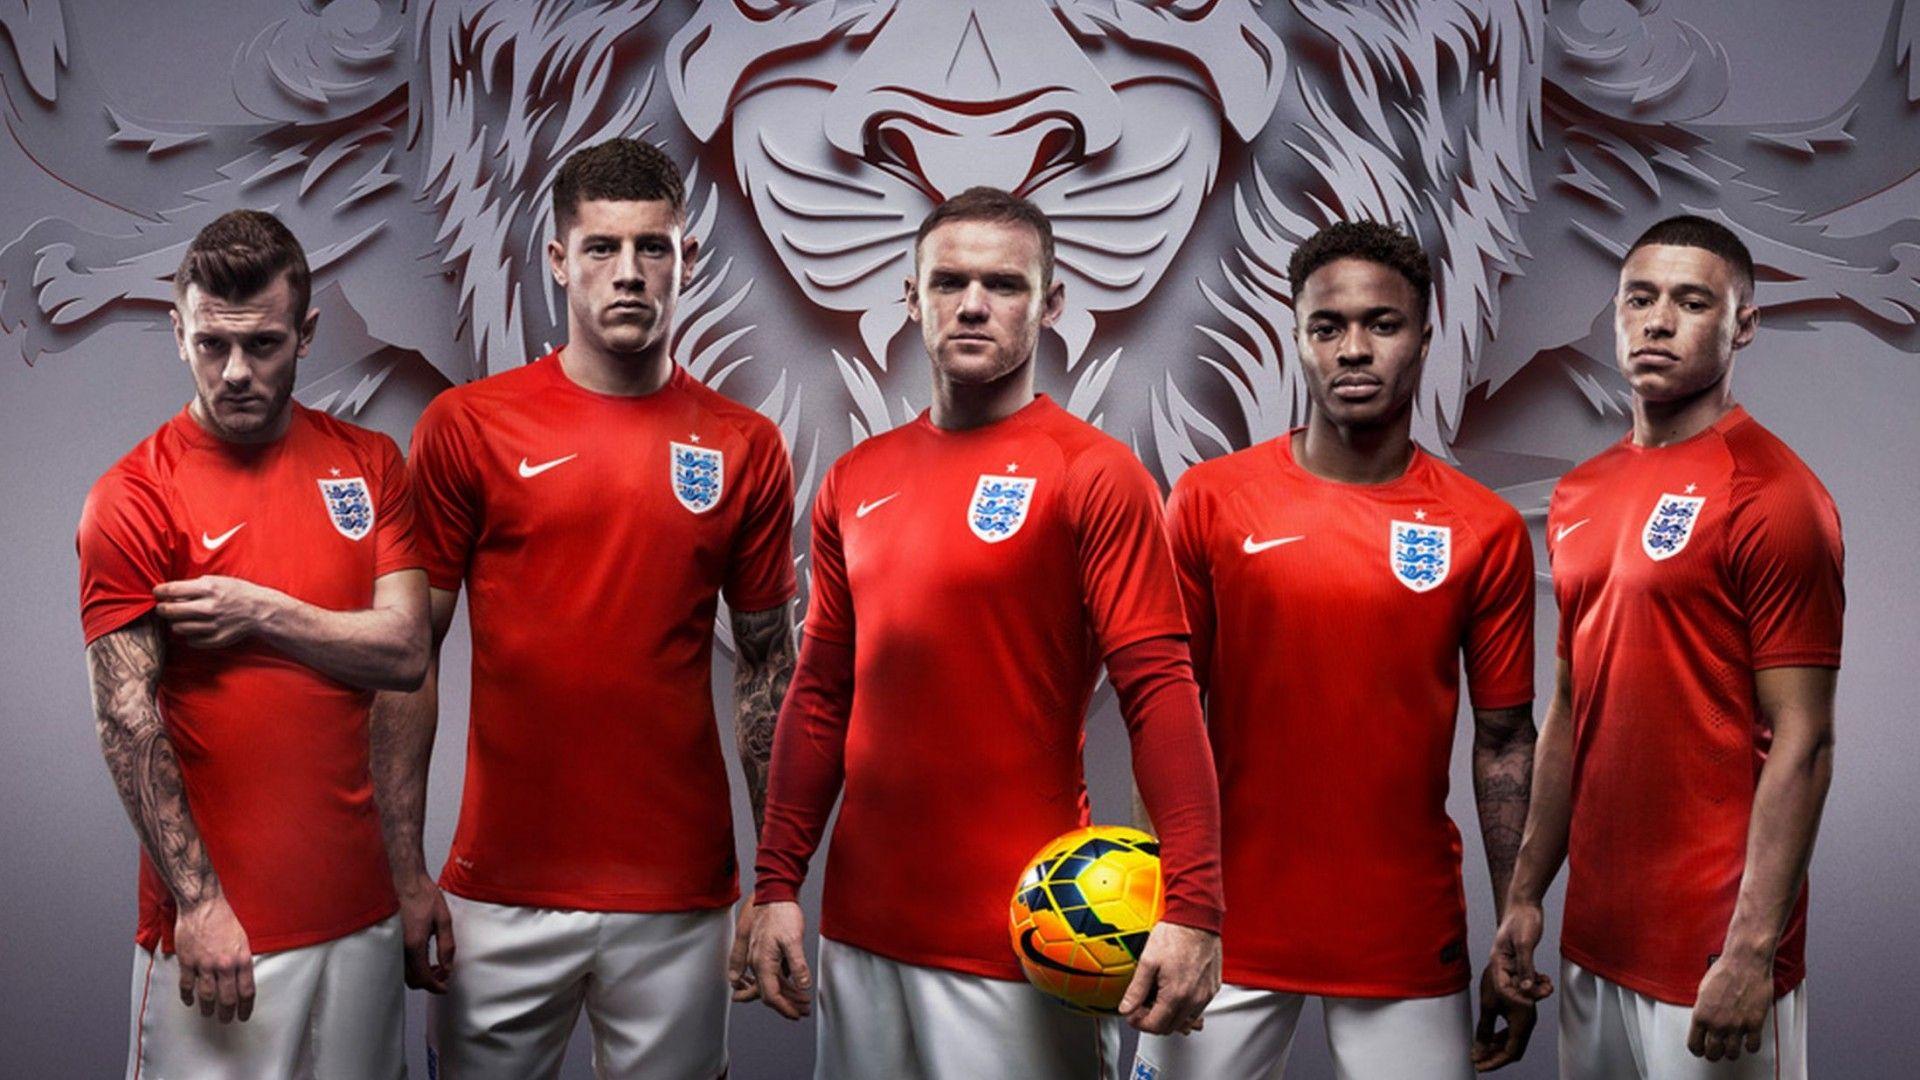 England National Football Team Wallpaper, Nice Picture of England